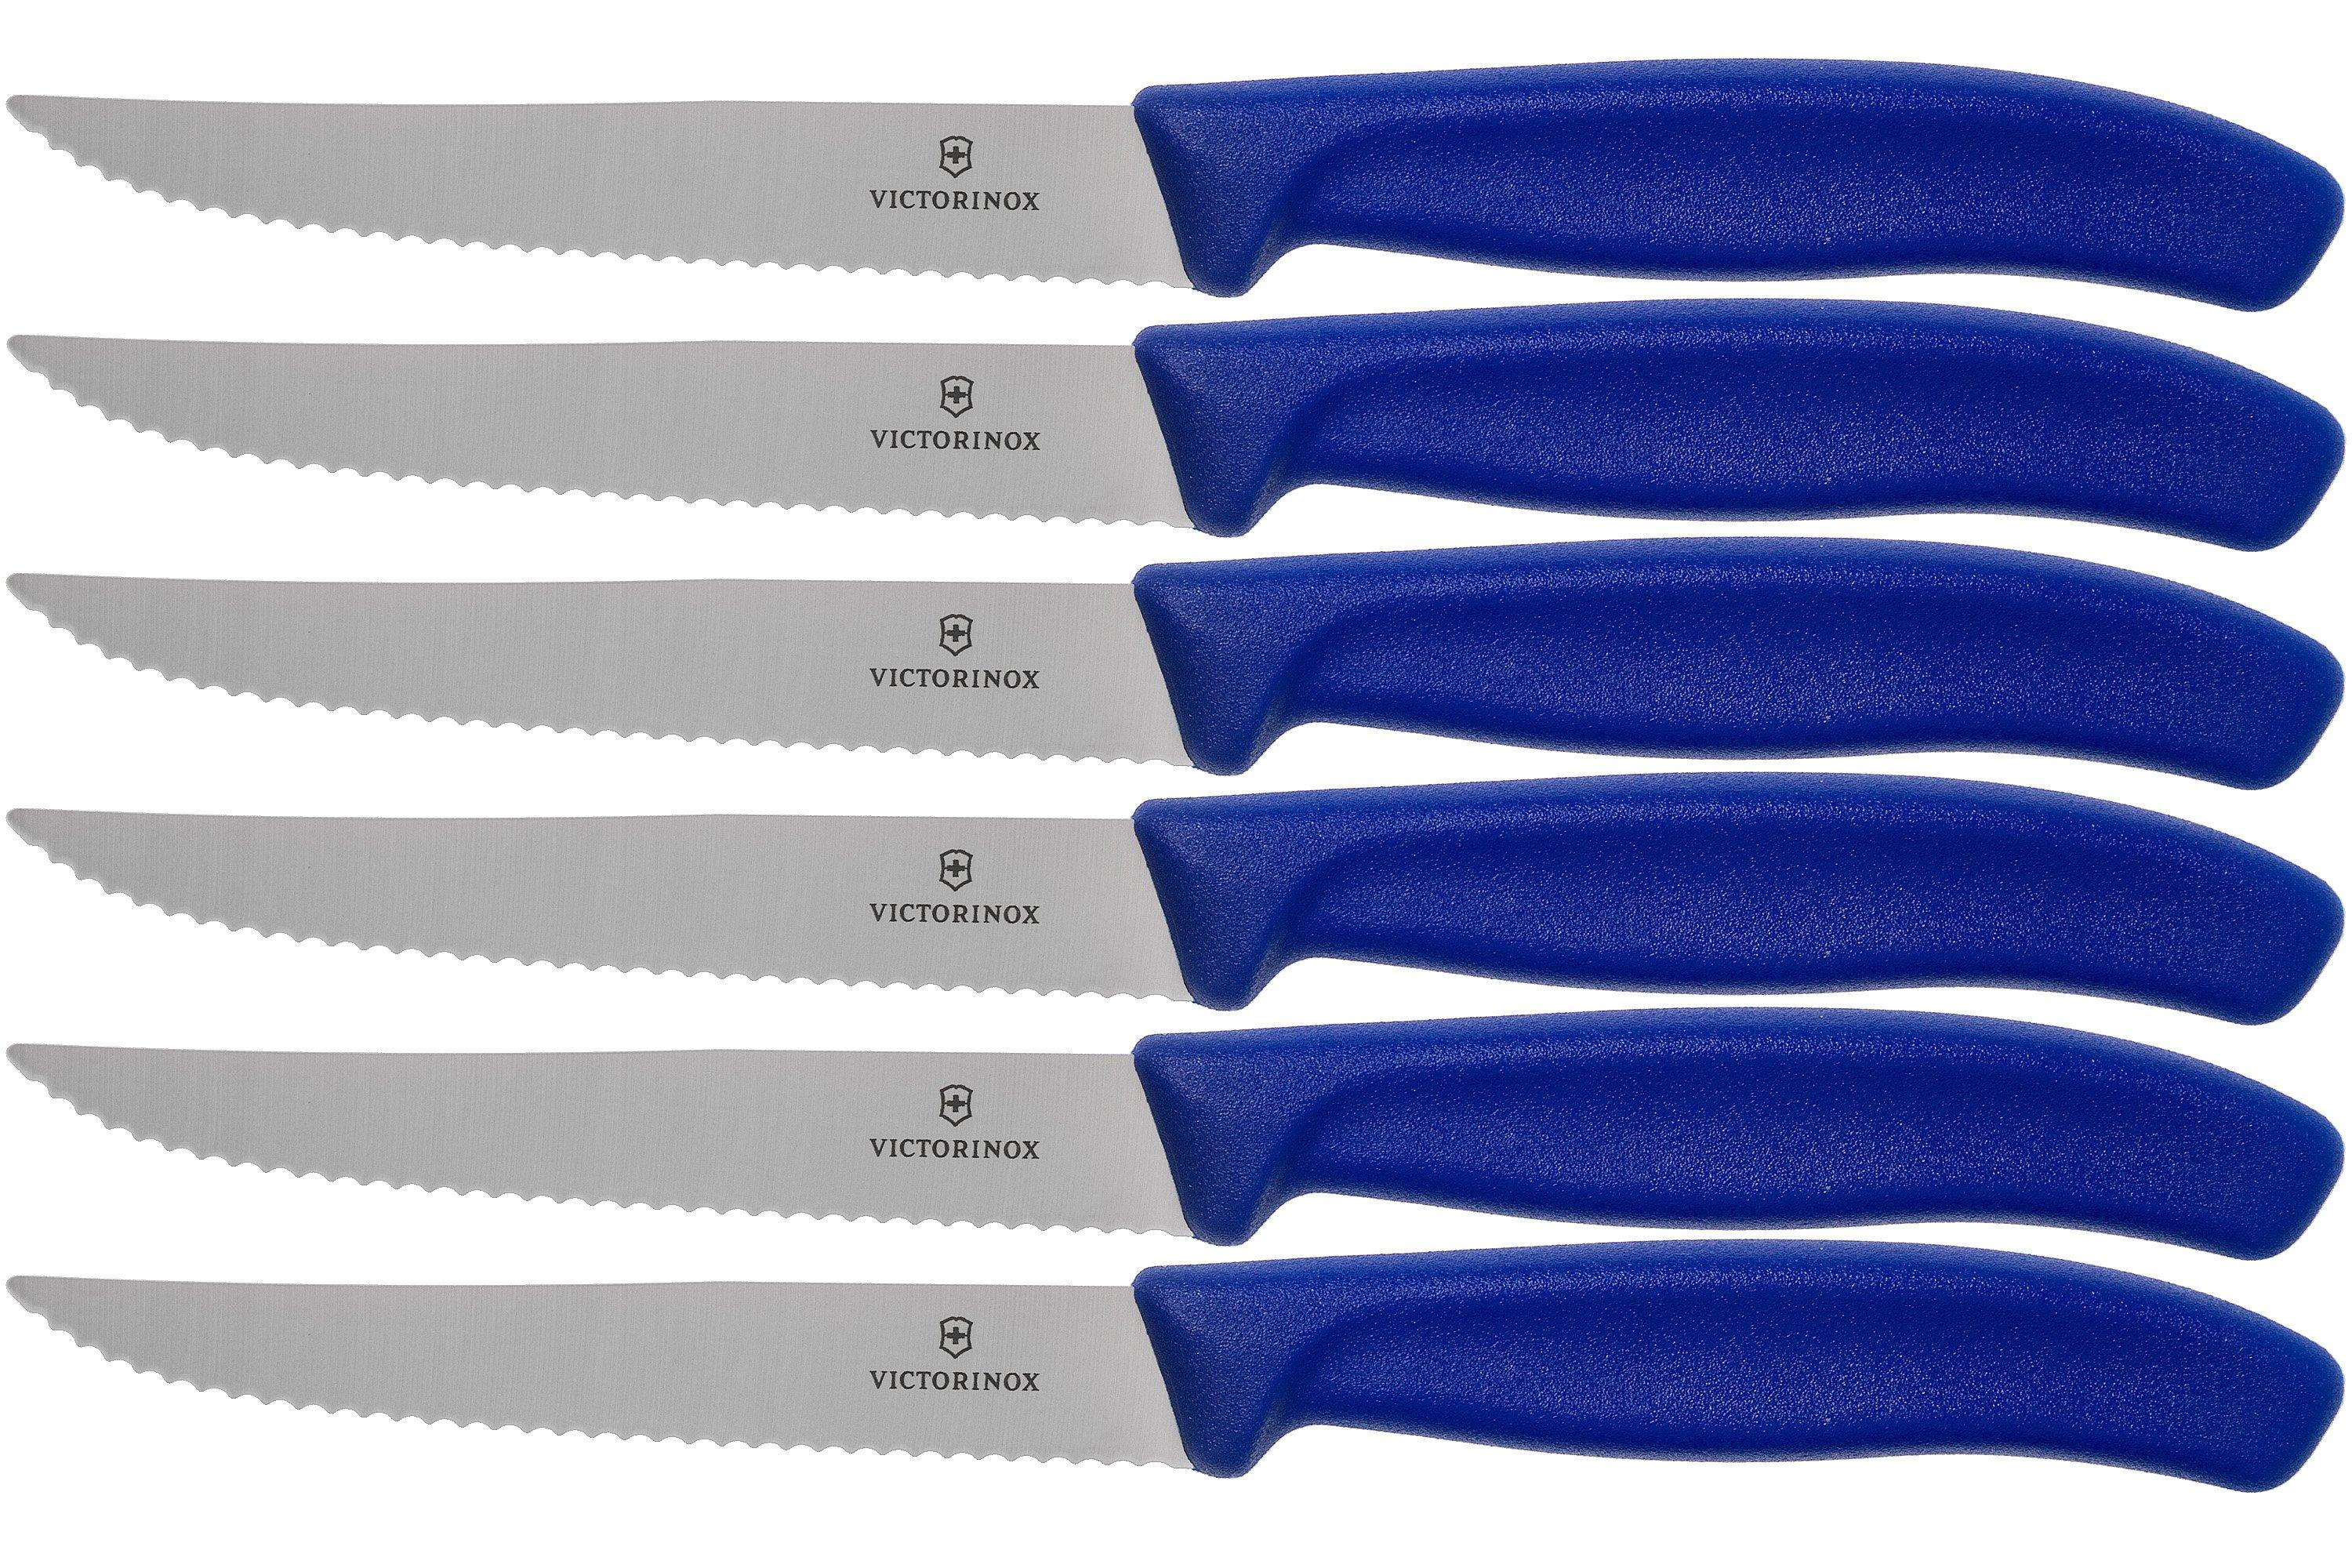 Victorinox 6.7233.6 Swiss Classic Steak Knife Set Ideal for Slicing a Wide  Variety of Steak Cuts Serrated Blade in Black, Set of 6